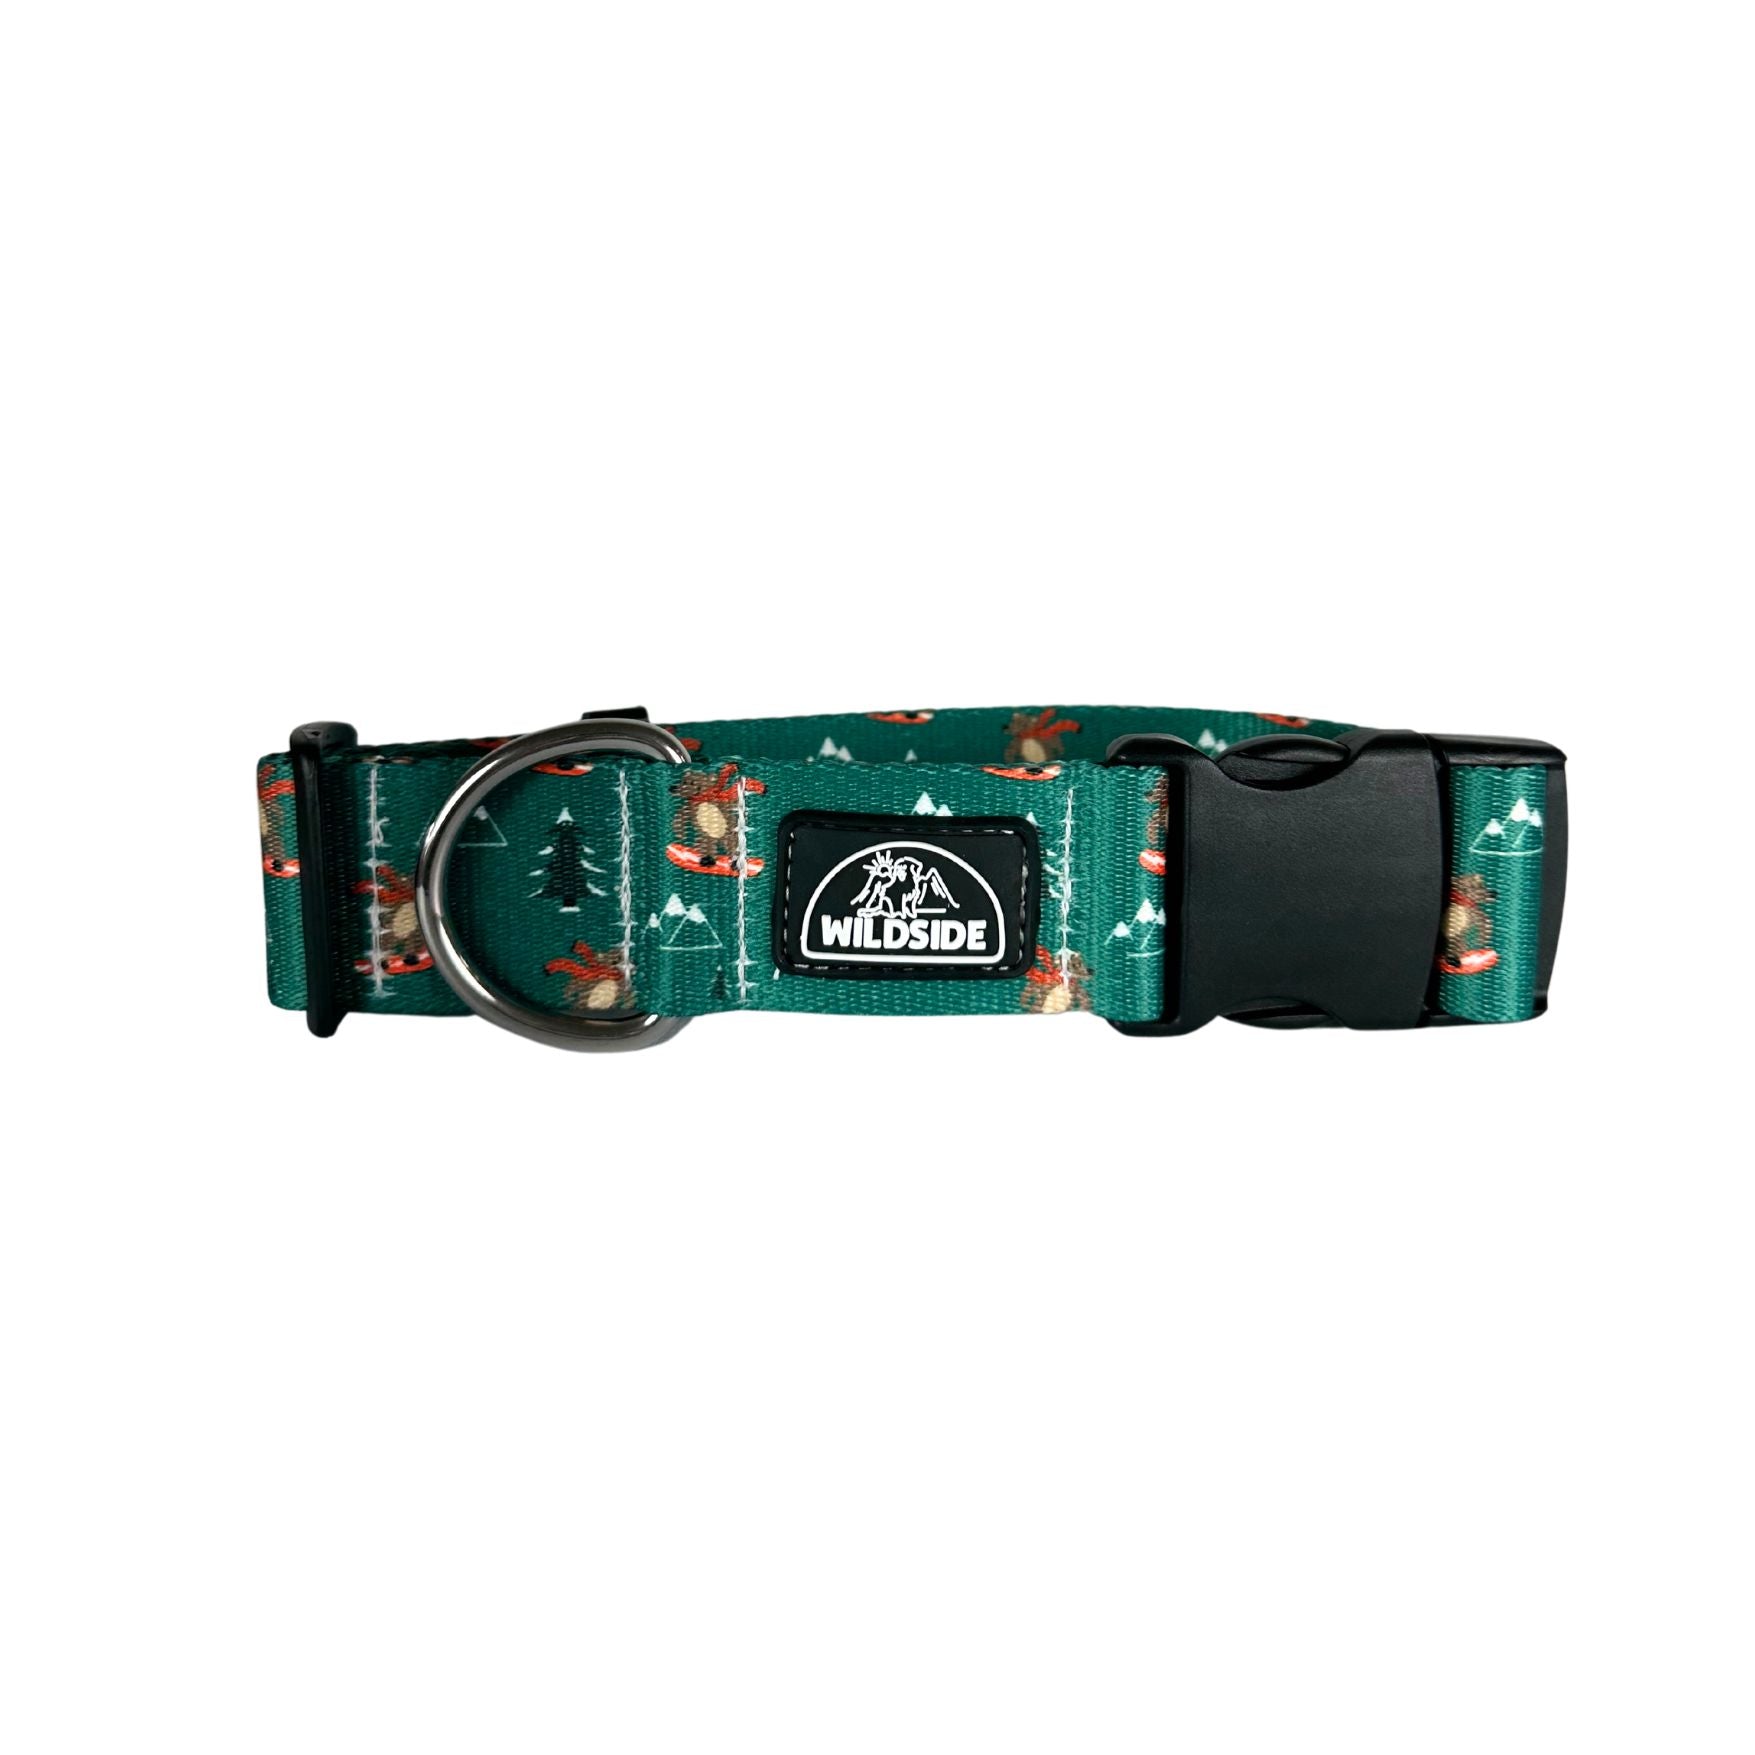 Alpine Snowboarding bear water resistant dog collar, front side of green dog collar, pine trees and bears on dog collar